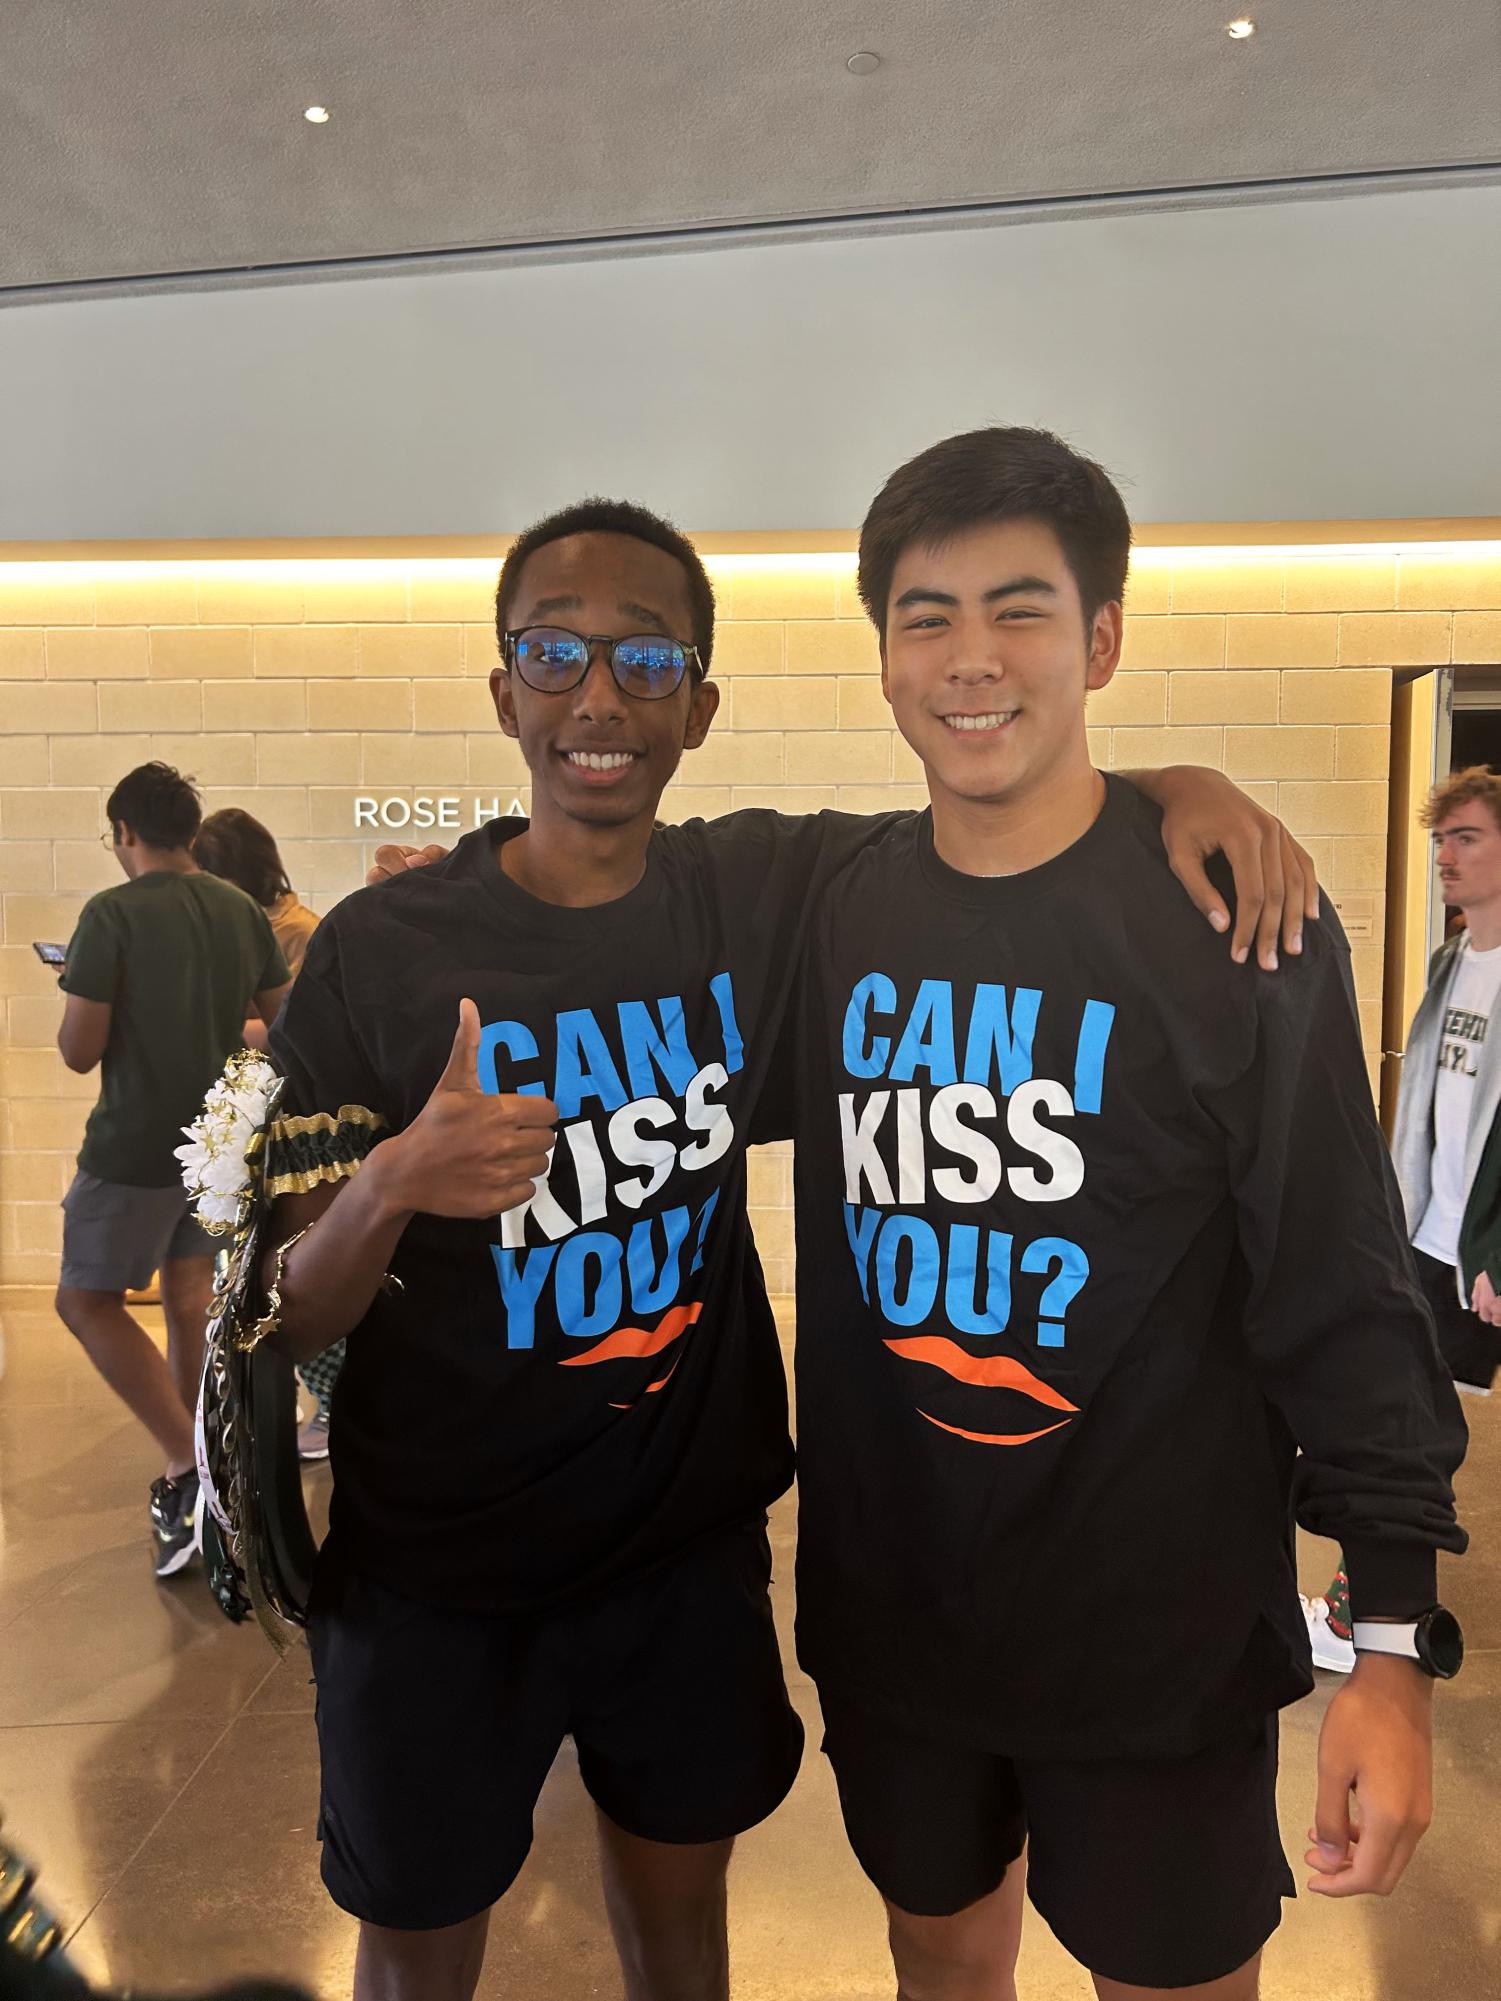 Senior students receive Can I Kiss You? merchandise during the presentation after answering a question. Photo courtesy of Iyad Mohammed.